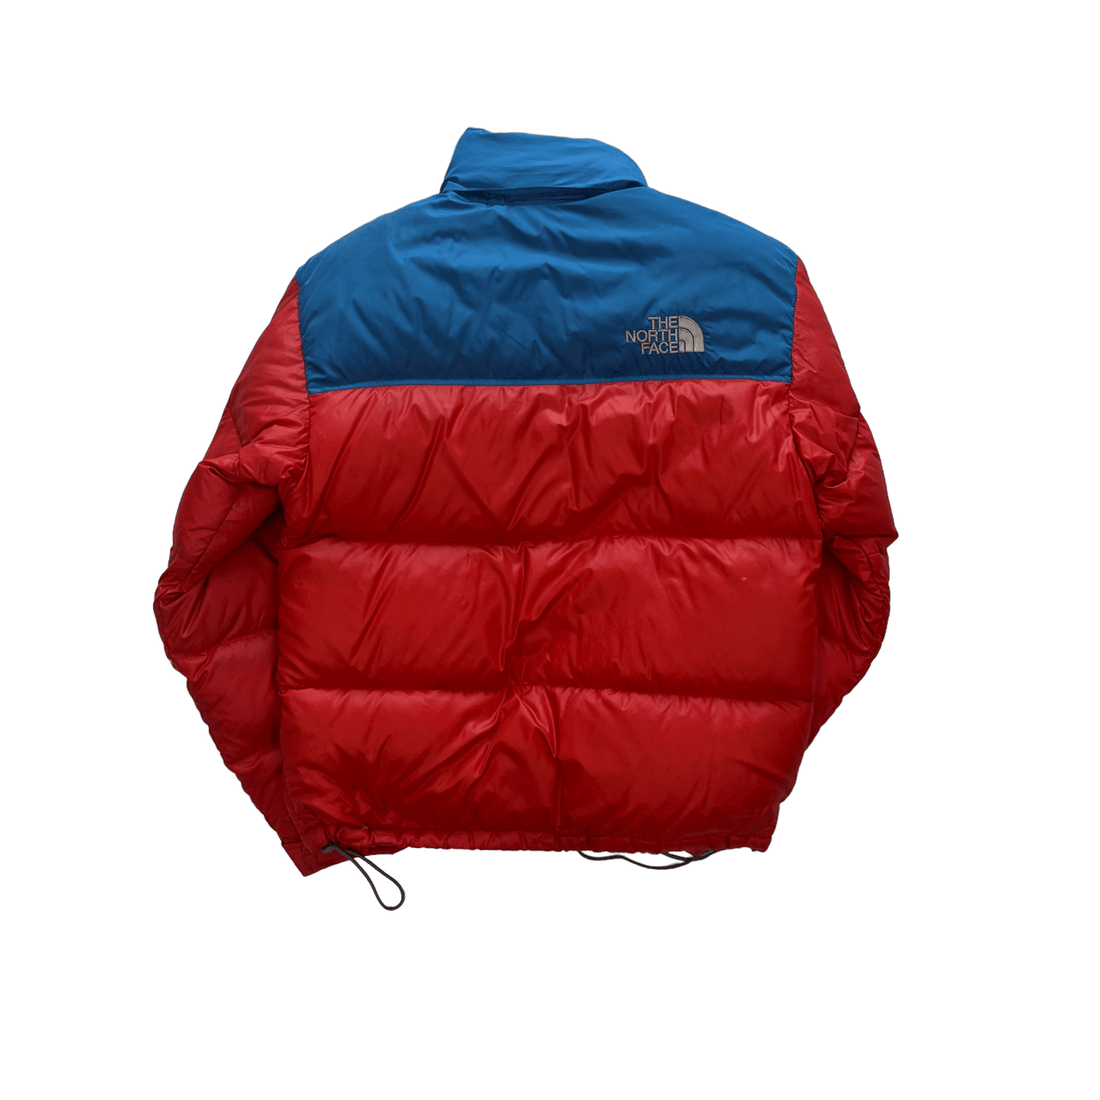 Vintage Red + Blue The North Face (TNF) Puffer Coat - Small - The Streetwear Studio